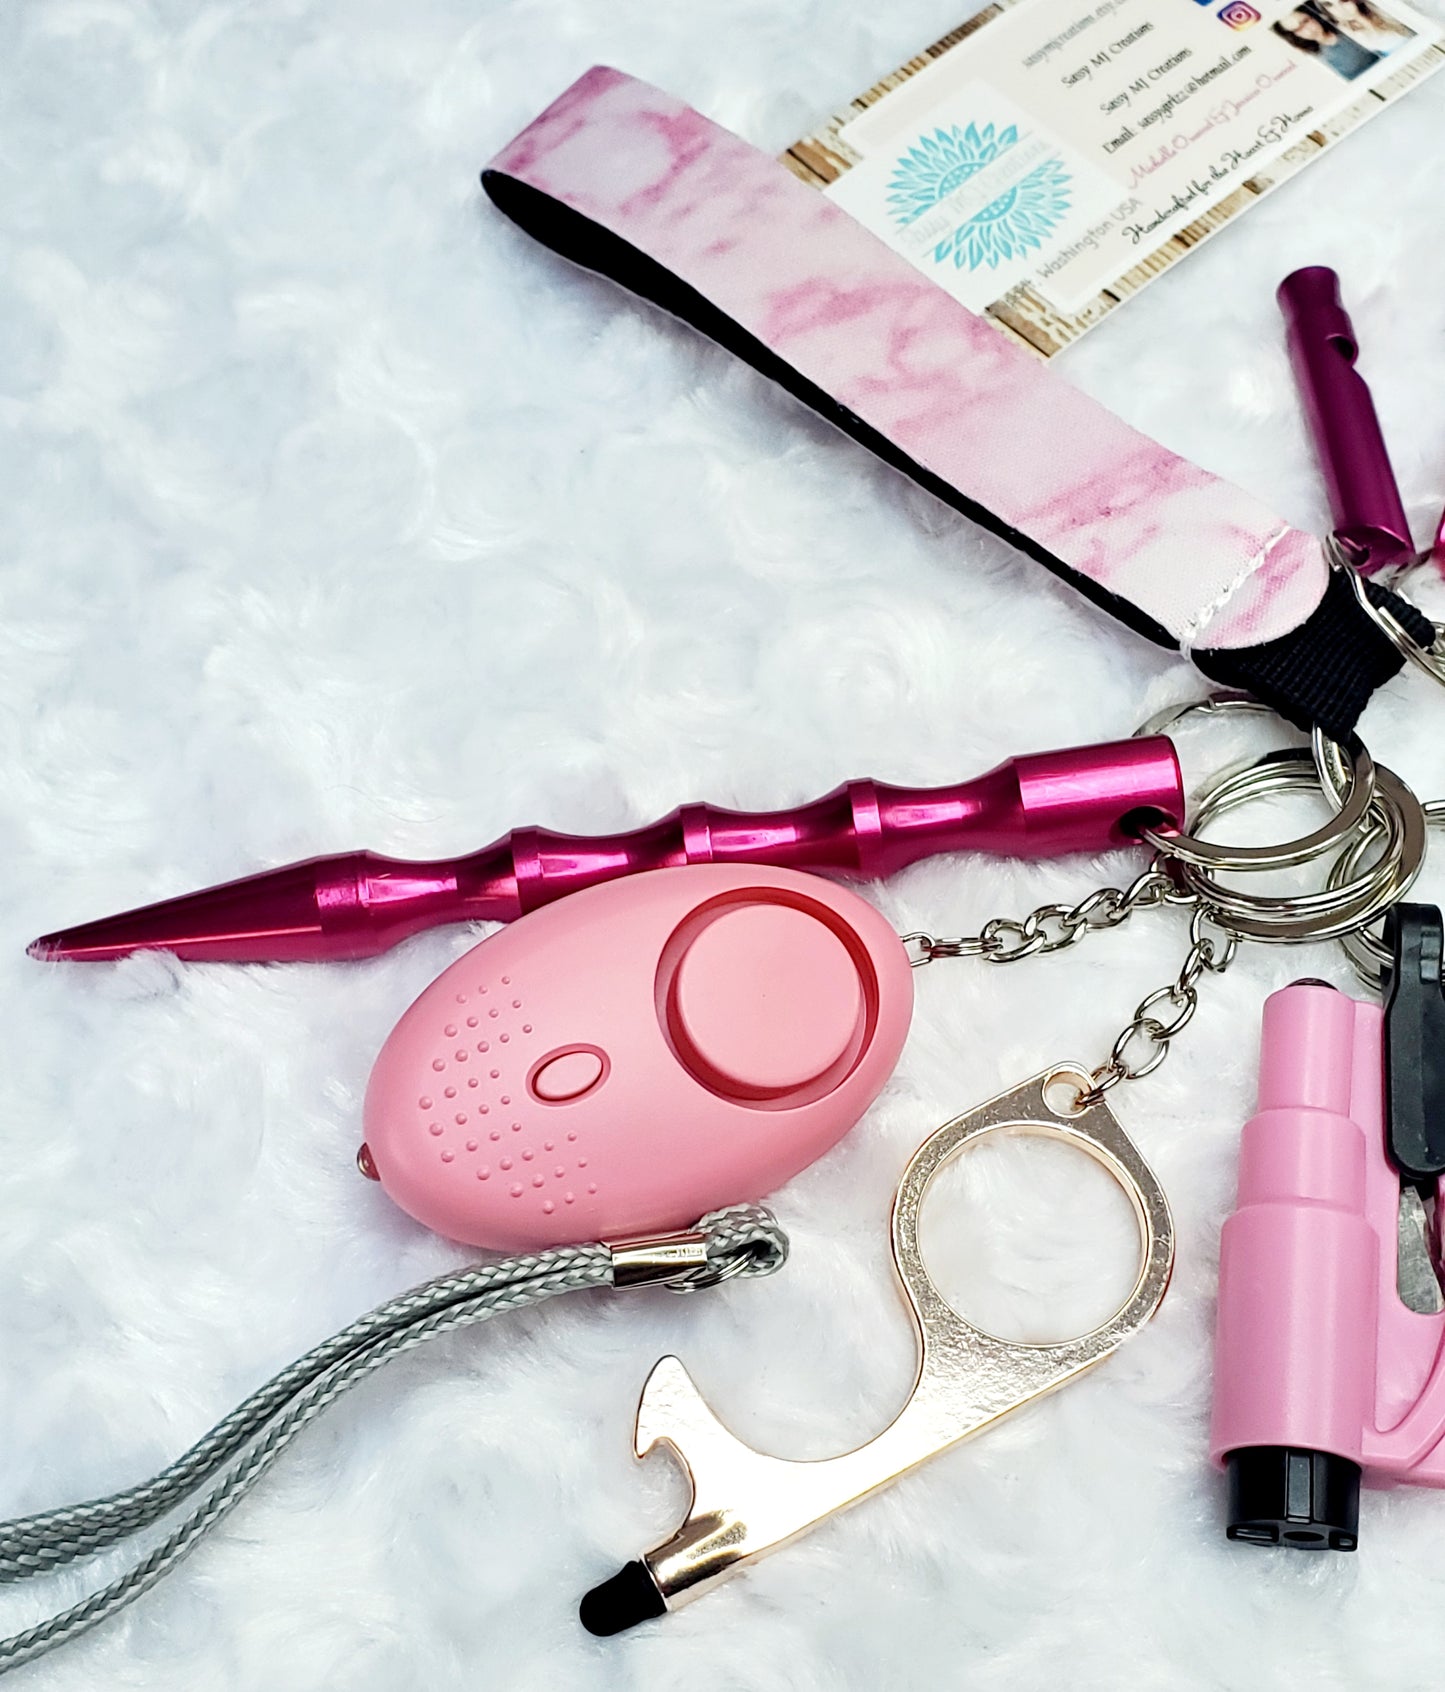 Pink Marble Neoprene Strap Safety Keychain Set-Personal Safety Kit 13 pc.